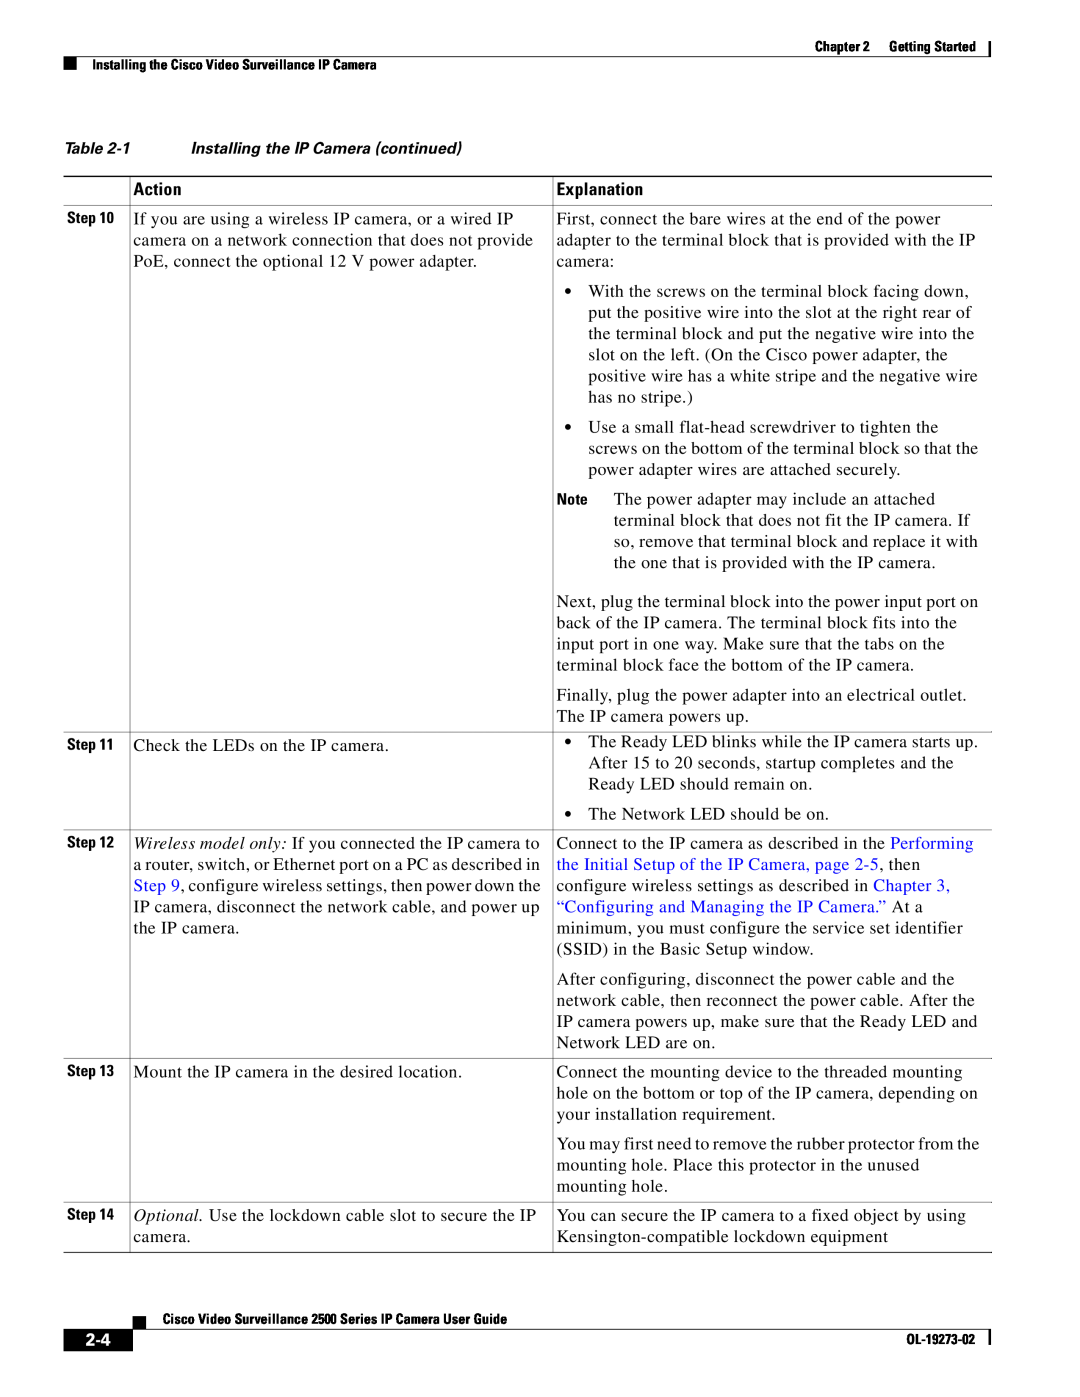 Cisco Systems 2500 Series, CIVS-IPC-2500 manual the Initial Setup of the IP Camera, page 2-5, then, Action, Explanation 